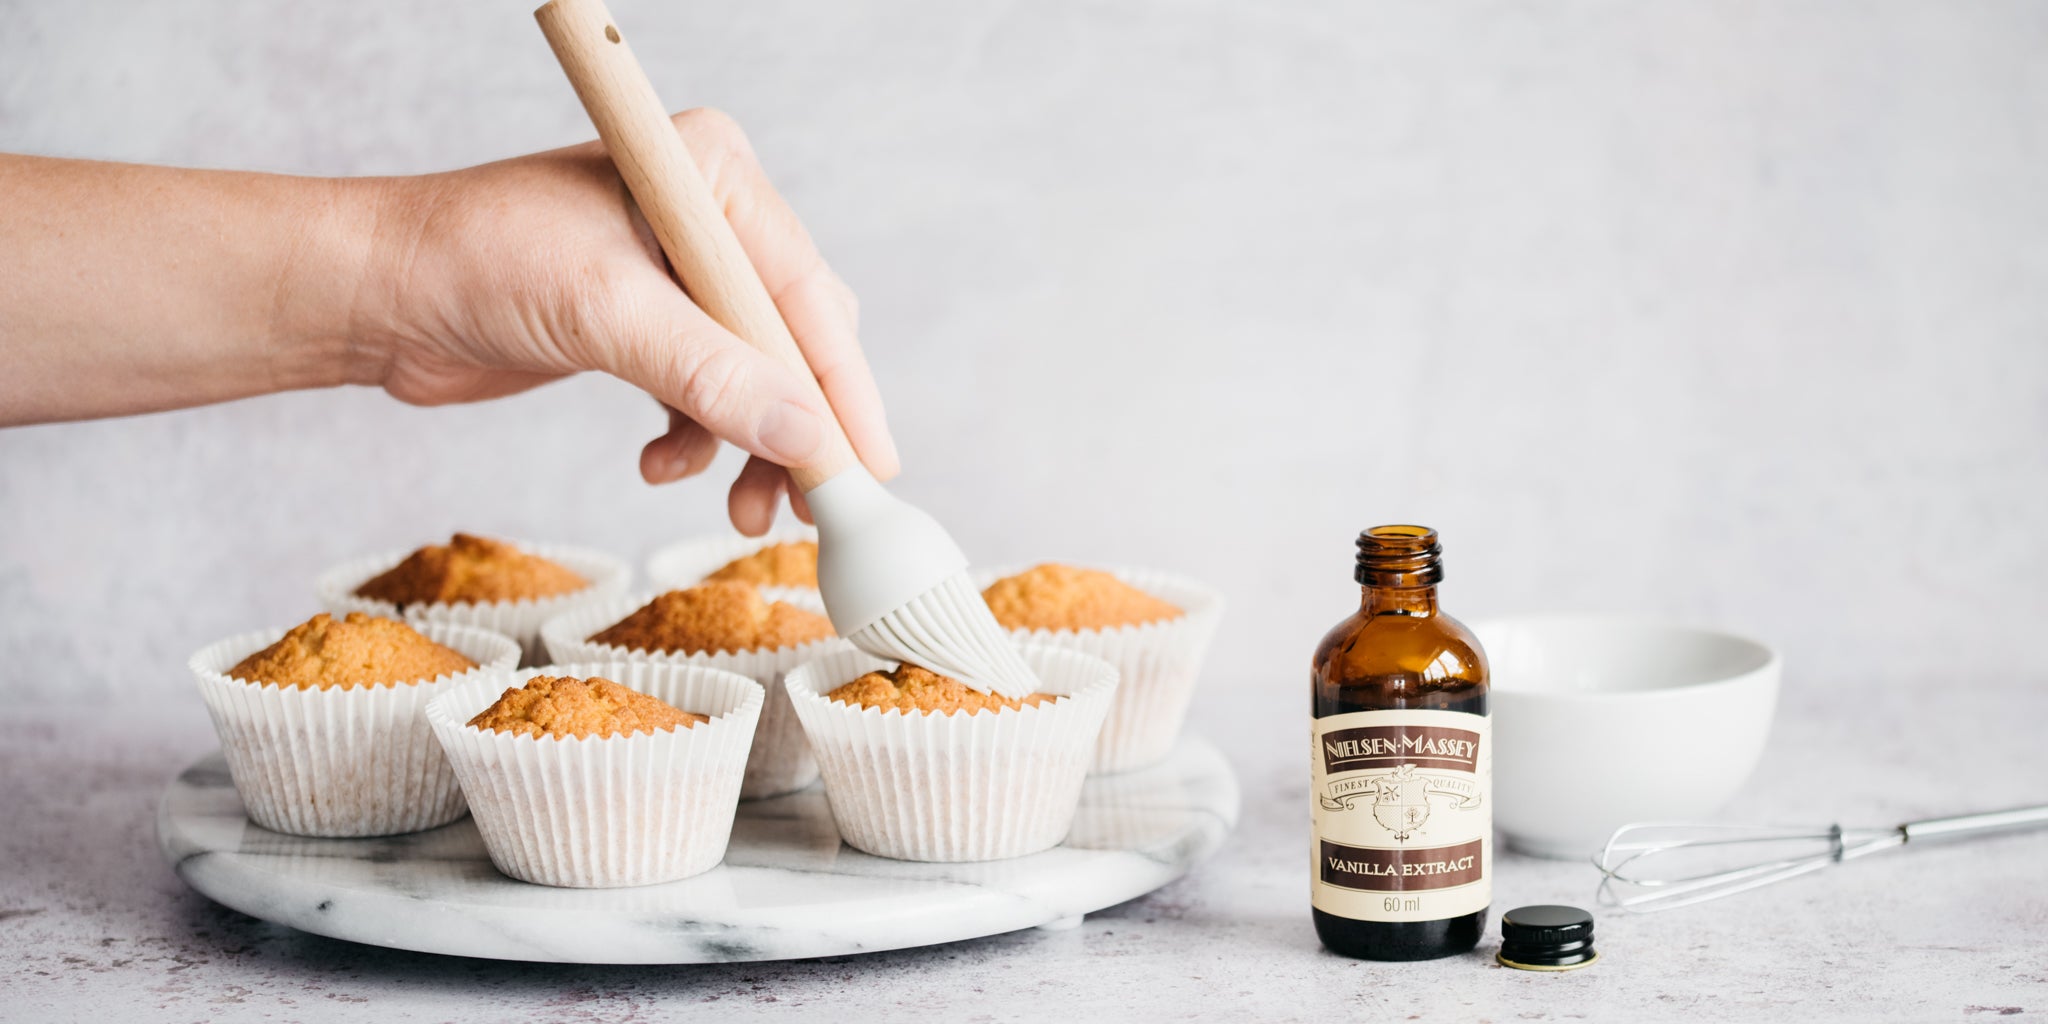 Vanilla Extract Cupcakes being hand brushed with Nielsen Massey Vanilla Extract to infuse the sponge